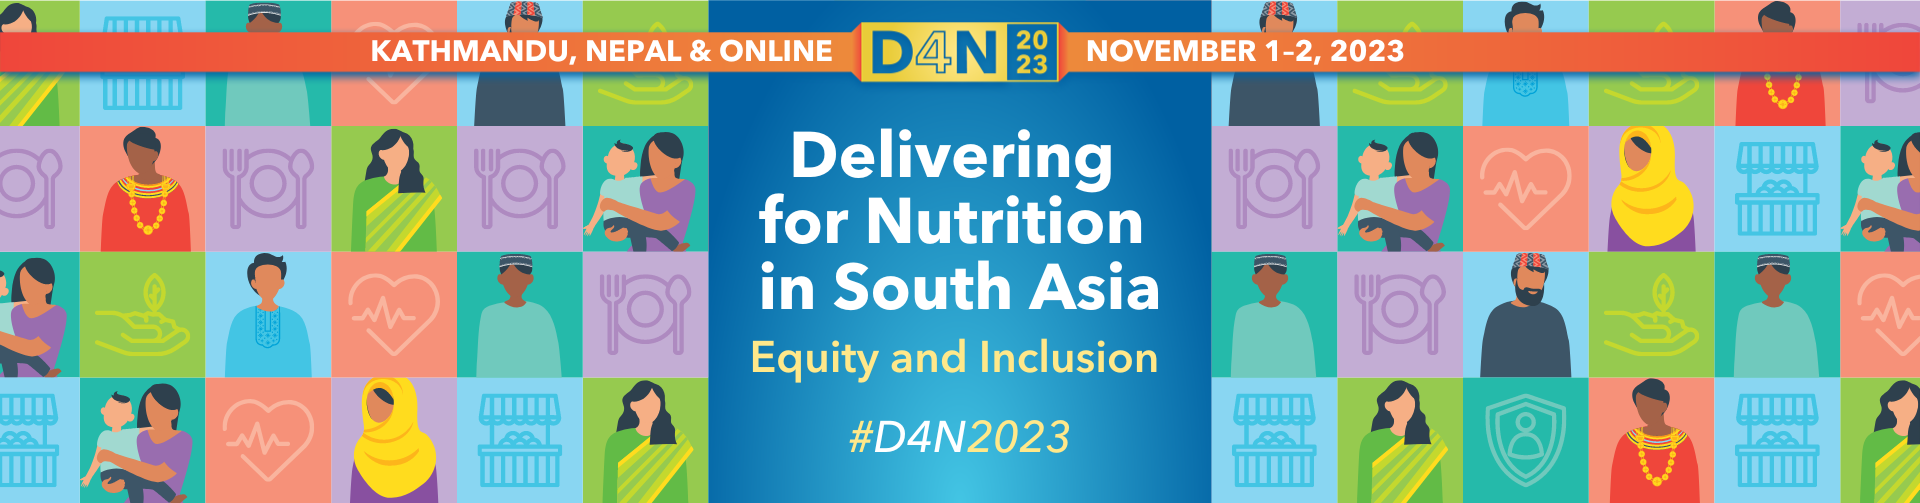 Delivering for Nutrition in South Asia: Equity and Inclusion